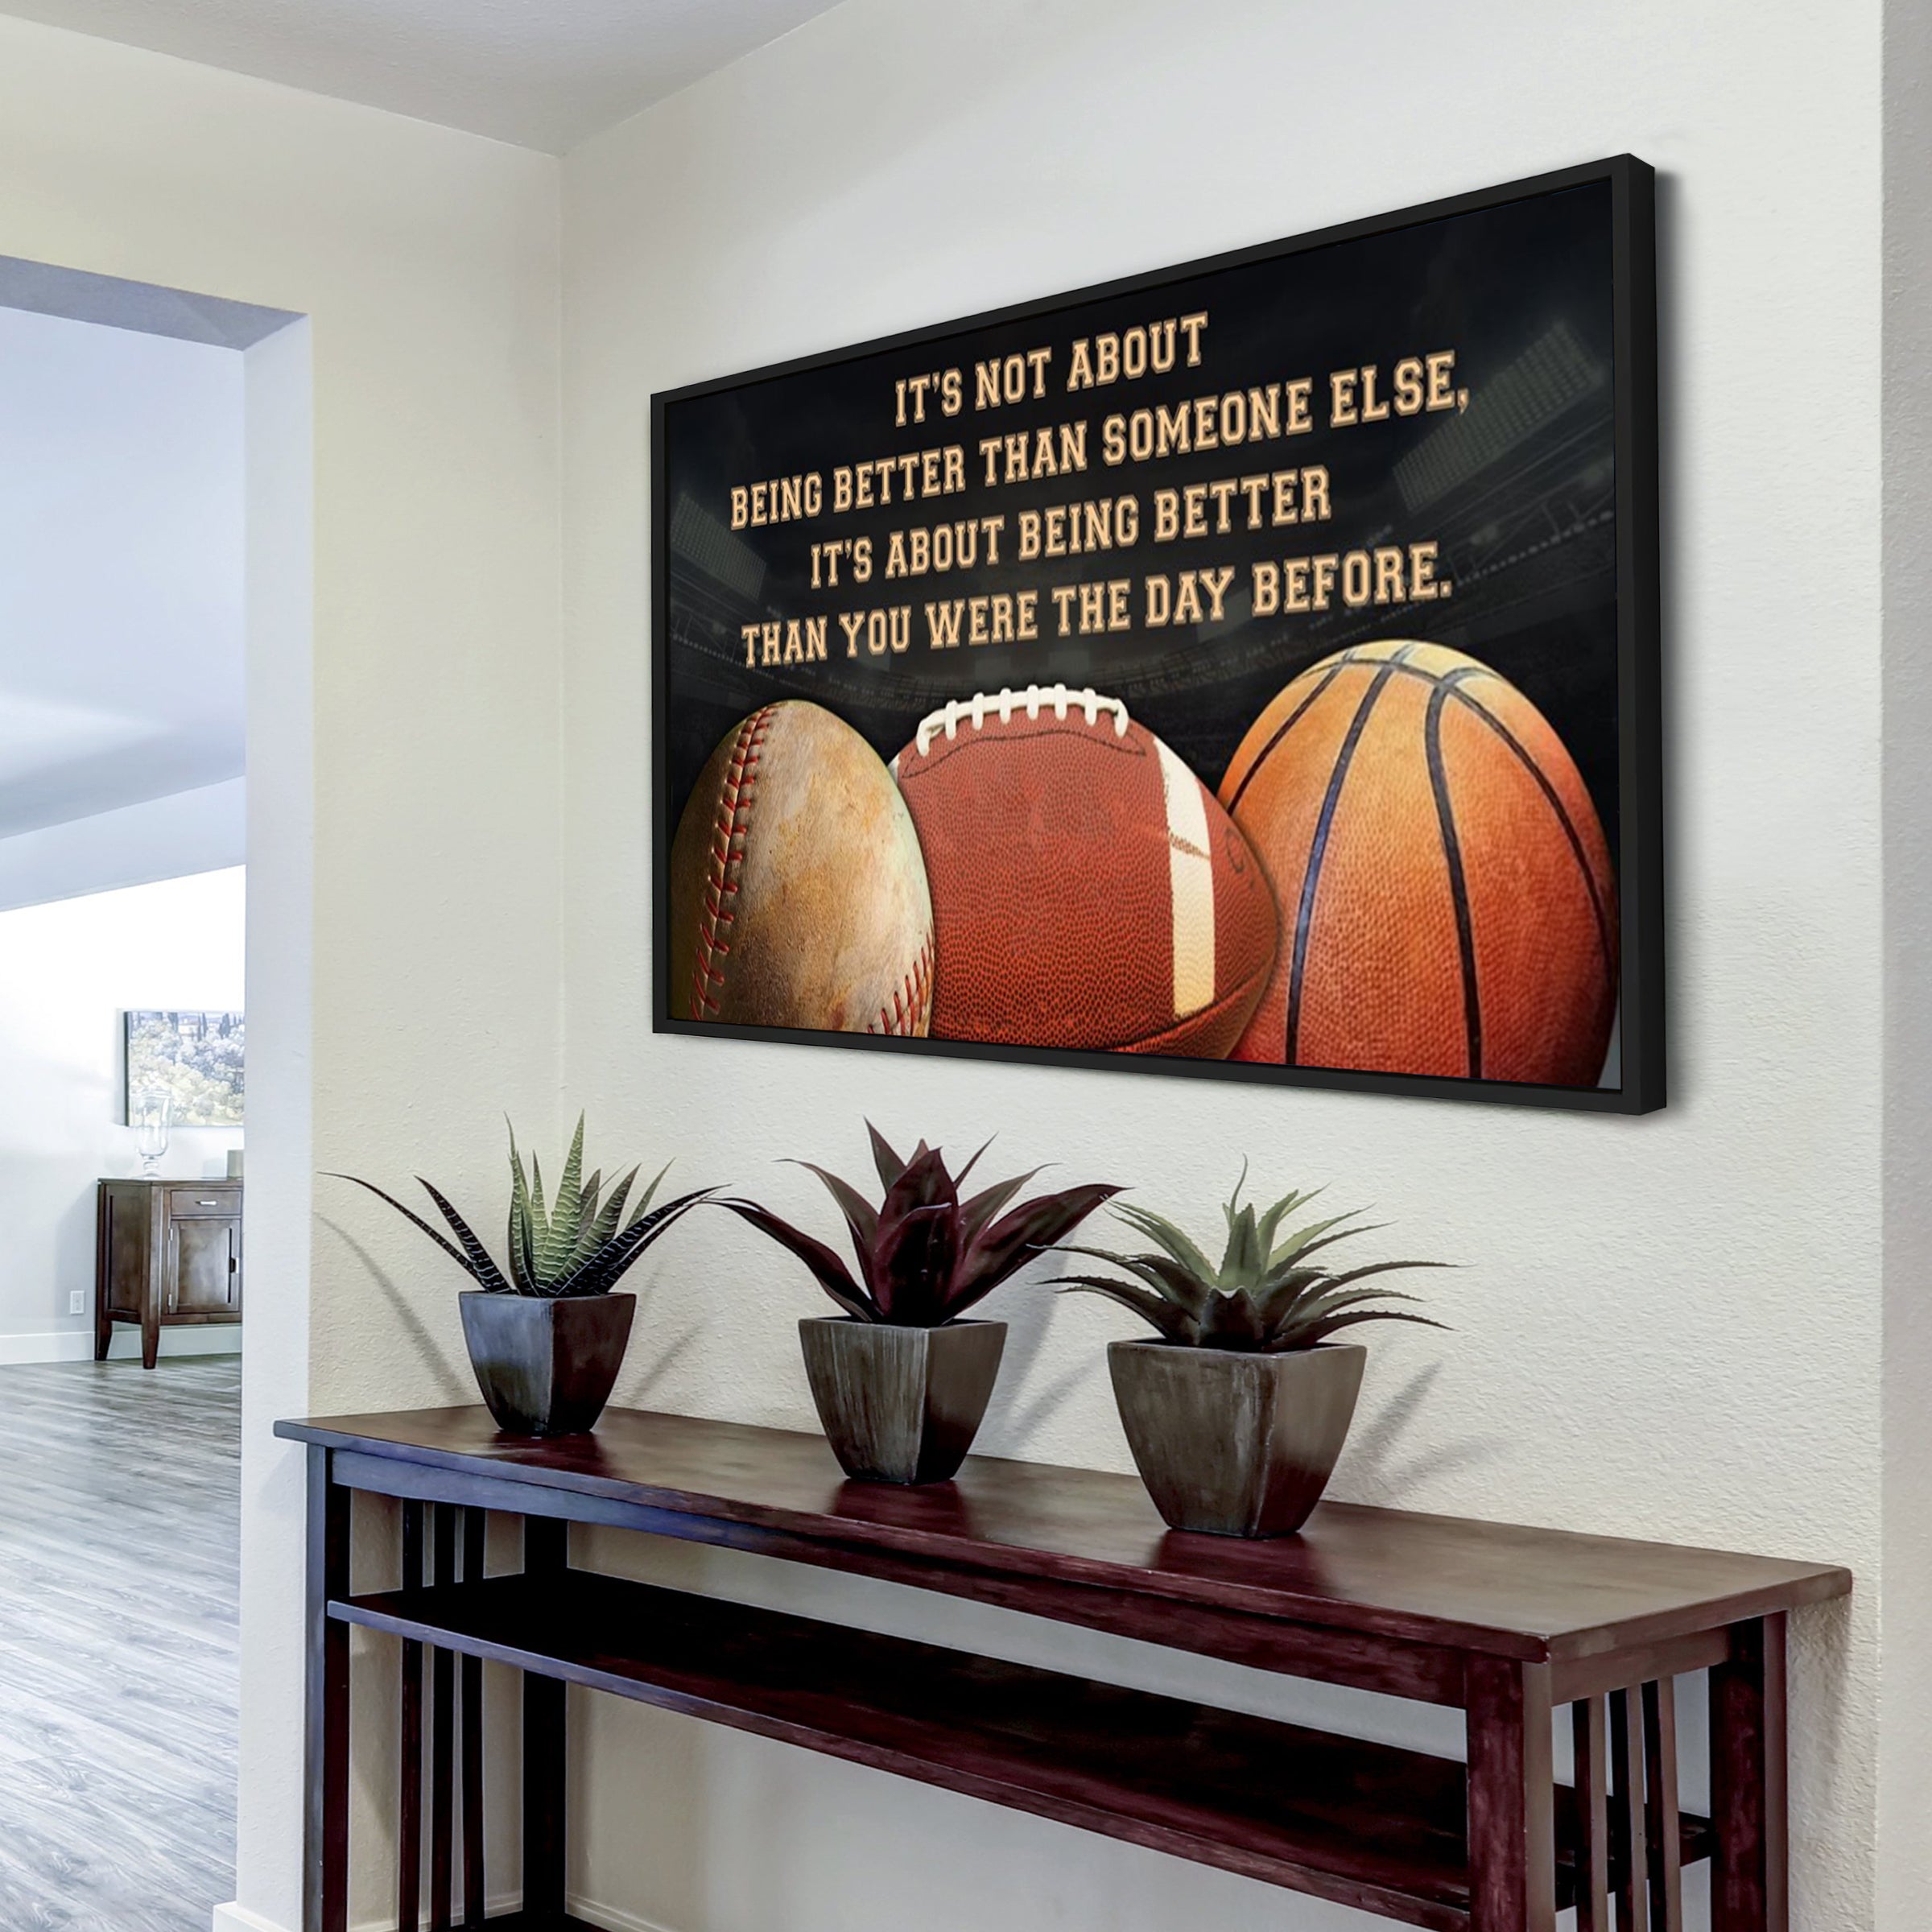 Mix Sport customizable poster canvas - It is not about better than someone else, It is about being better than you were the day before